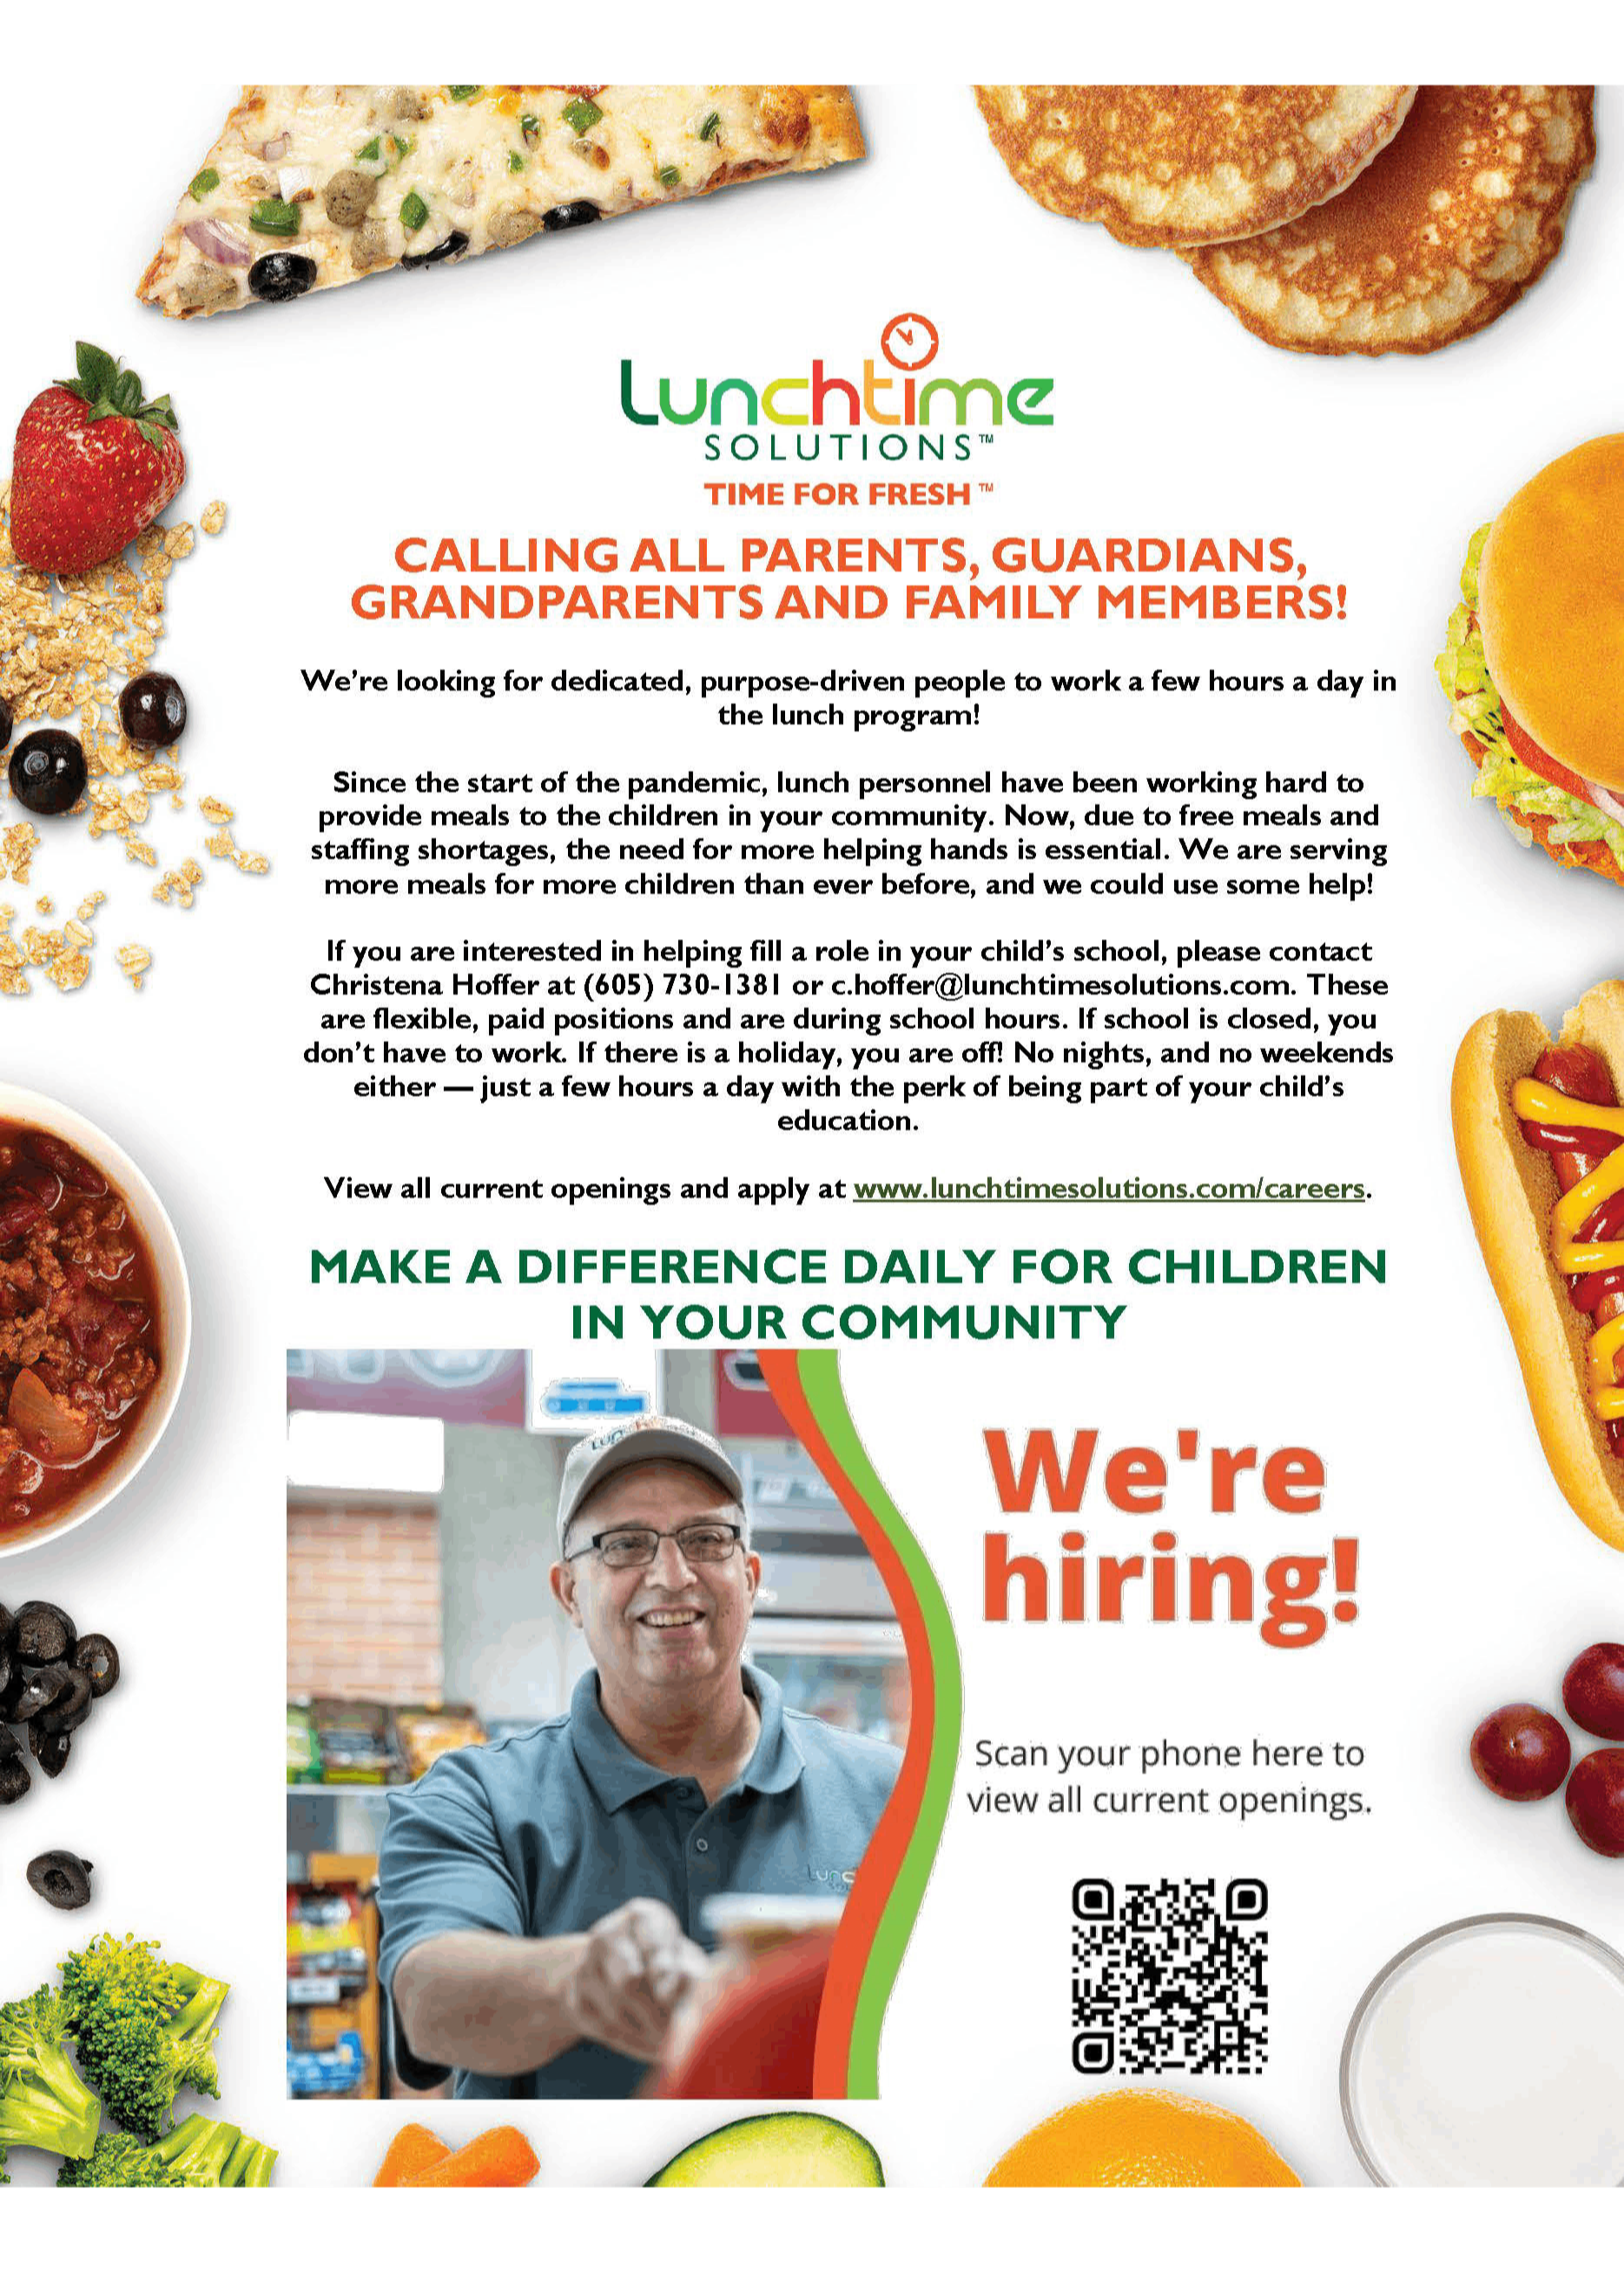 Lunchtime Solutions Time for Fresh. Calling all parents, guardian, grandparents and family members! We're looking for dedicated, purpose-driven people to work a few hours a day in the lunch program! Since the start of the pandemic, lunch personnel have been working hard to provide meals to the children in your community. Now, due to free meals and staffing shortages, the need for helping hands is essential. We are serving more meals for more children than ever before, and we could use some help! If you are interested in helping fill a role in your child's school please contact Christena Hoffer at (605) 730-1381 or c.hoffer@lunchtimesolutions.com. These are flexible, paid positions and are during school hours. If school is closed, you don't have to work. If there is a holiday, you are off! No nights, and no weekends either - just a few hours a day with the perk of being part of your child's education. View all current openings and apply at www.lunchtimesolutions.com/careers Make a difference daily for children in your community We're hiring!